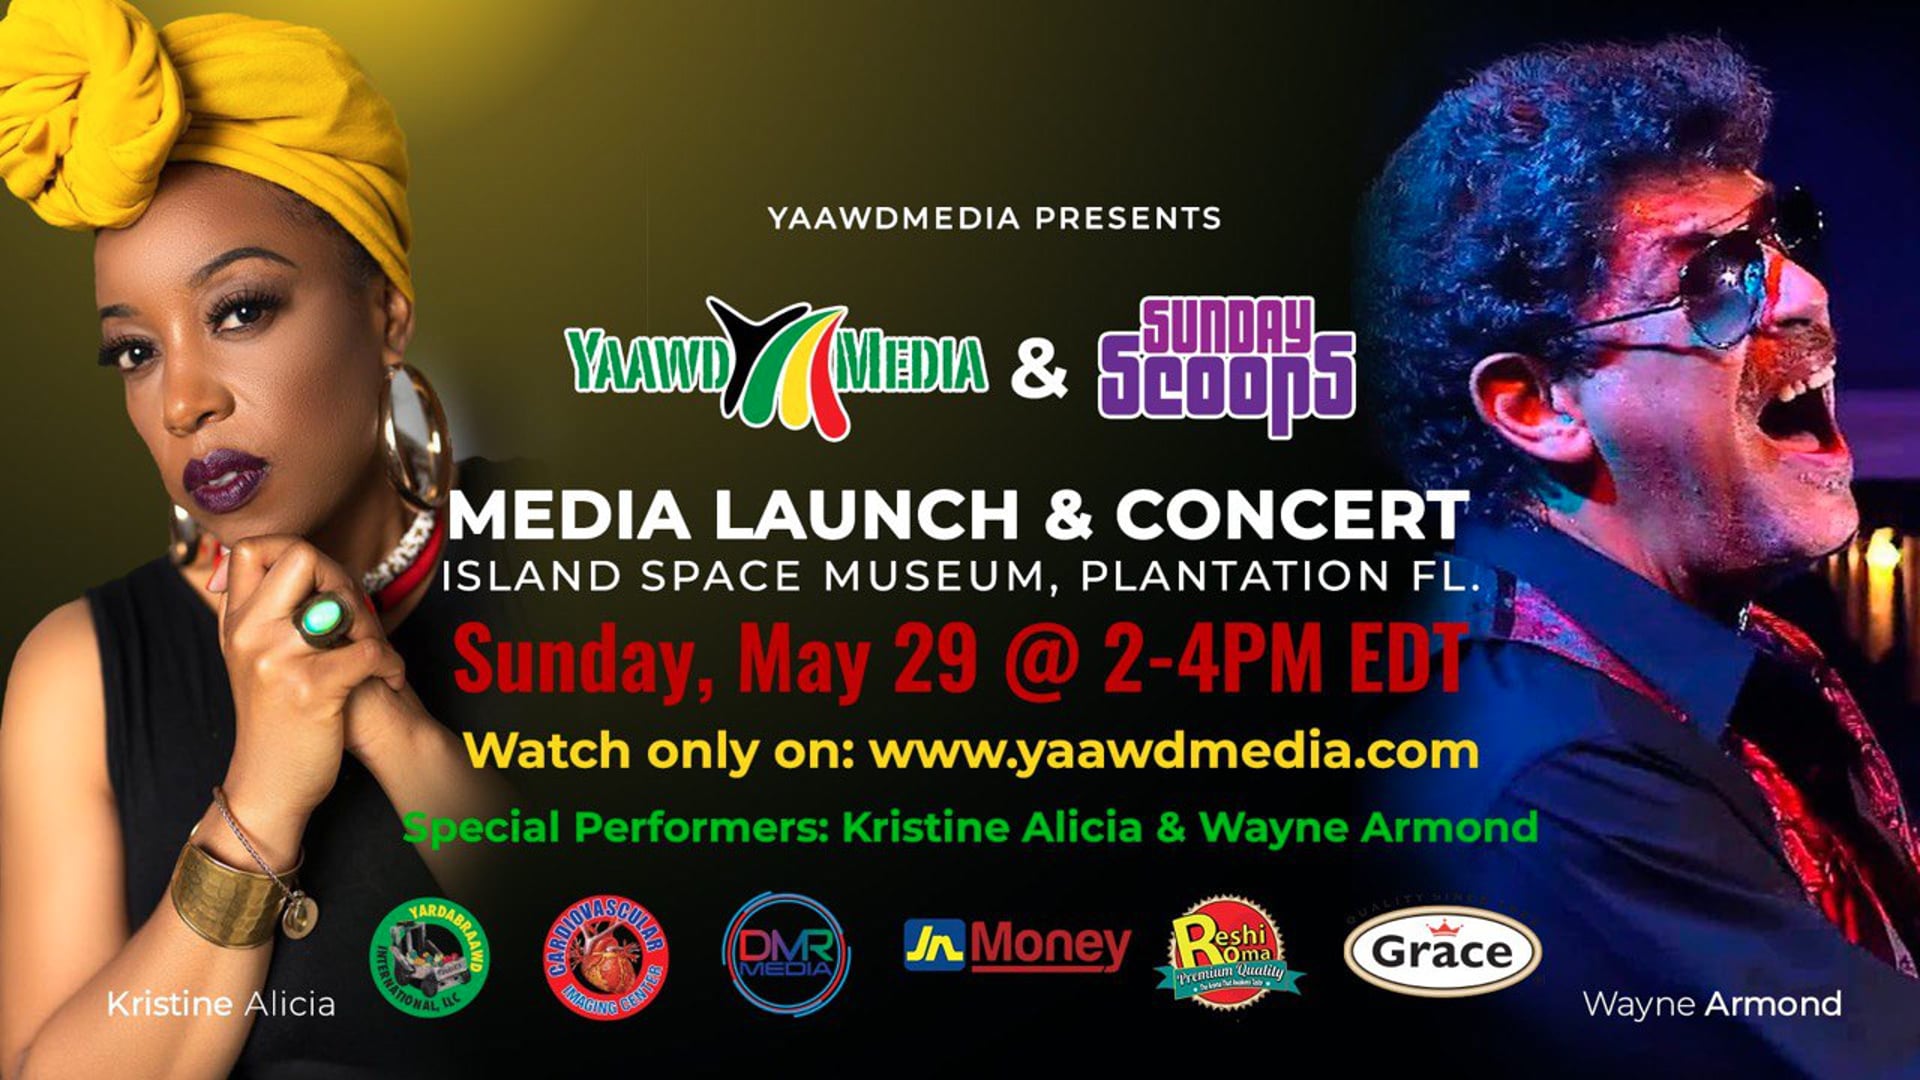 Sunday Scoops Presents - Yaawd Media Launch Event